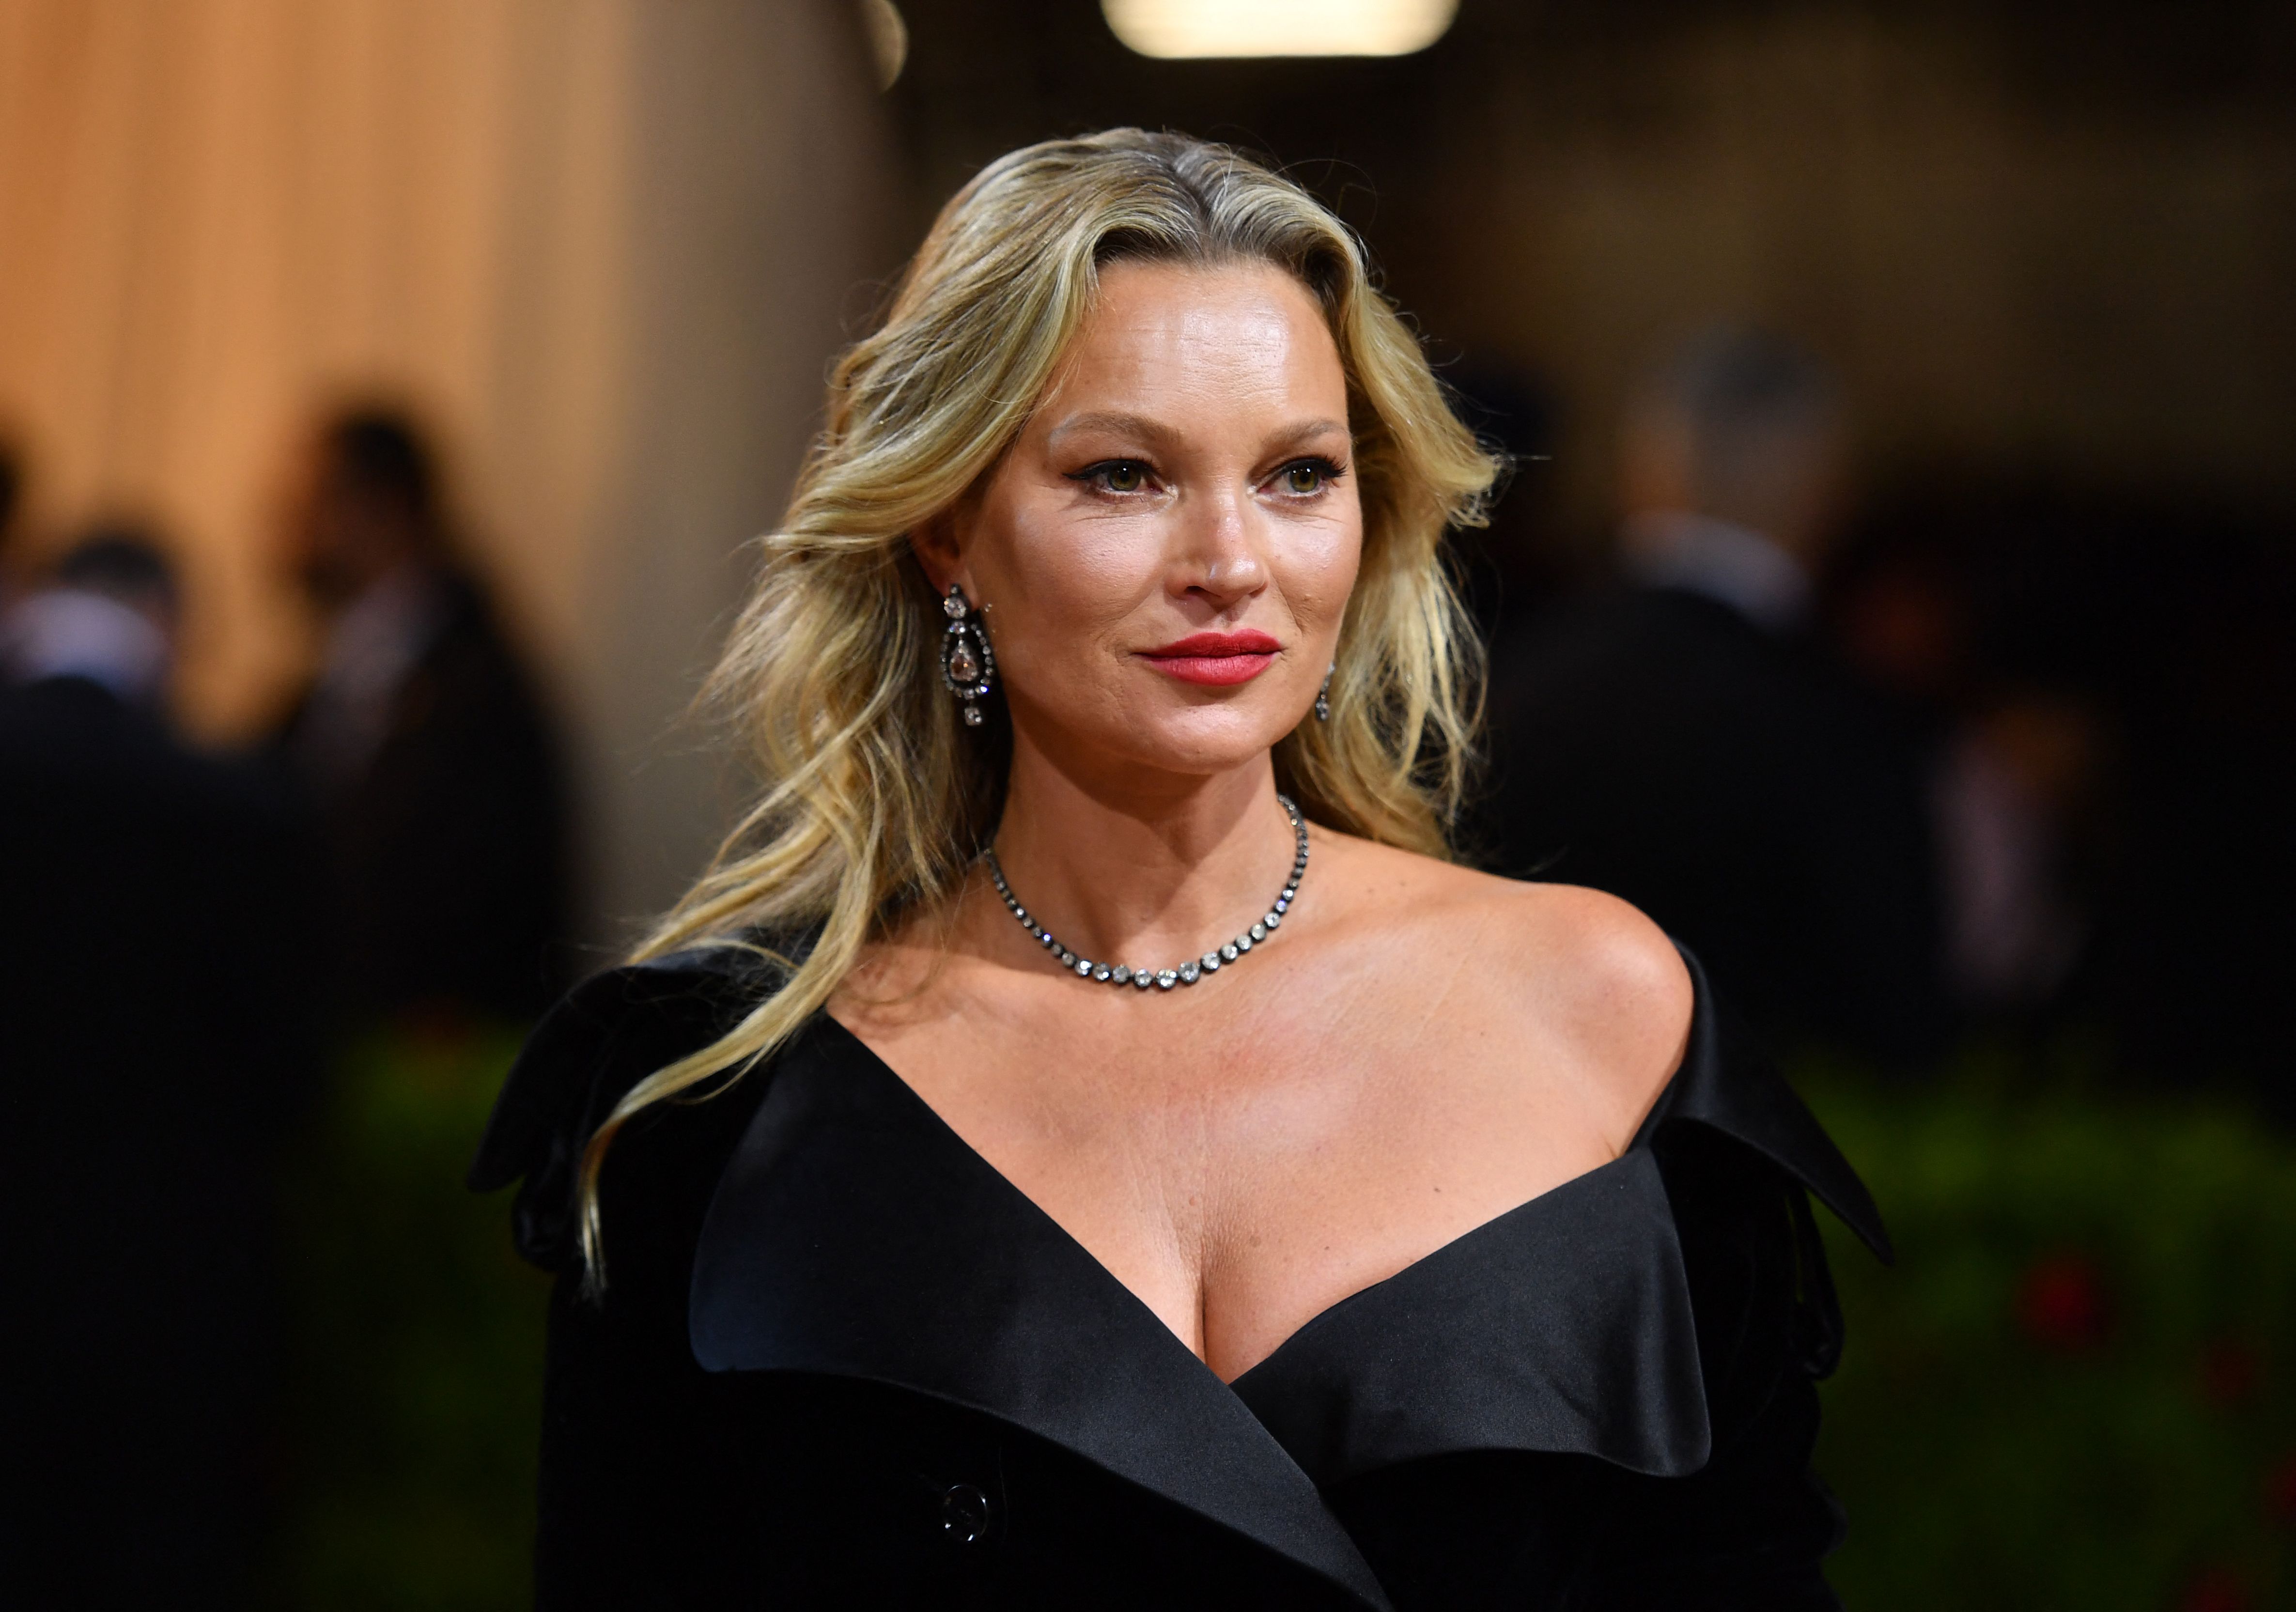 Kate Moss expected to be called by Johnny Depp’s legal team as a witness